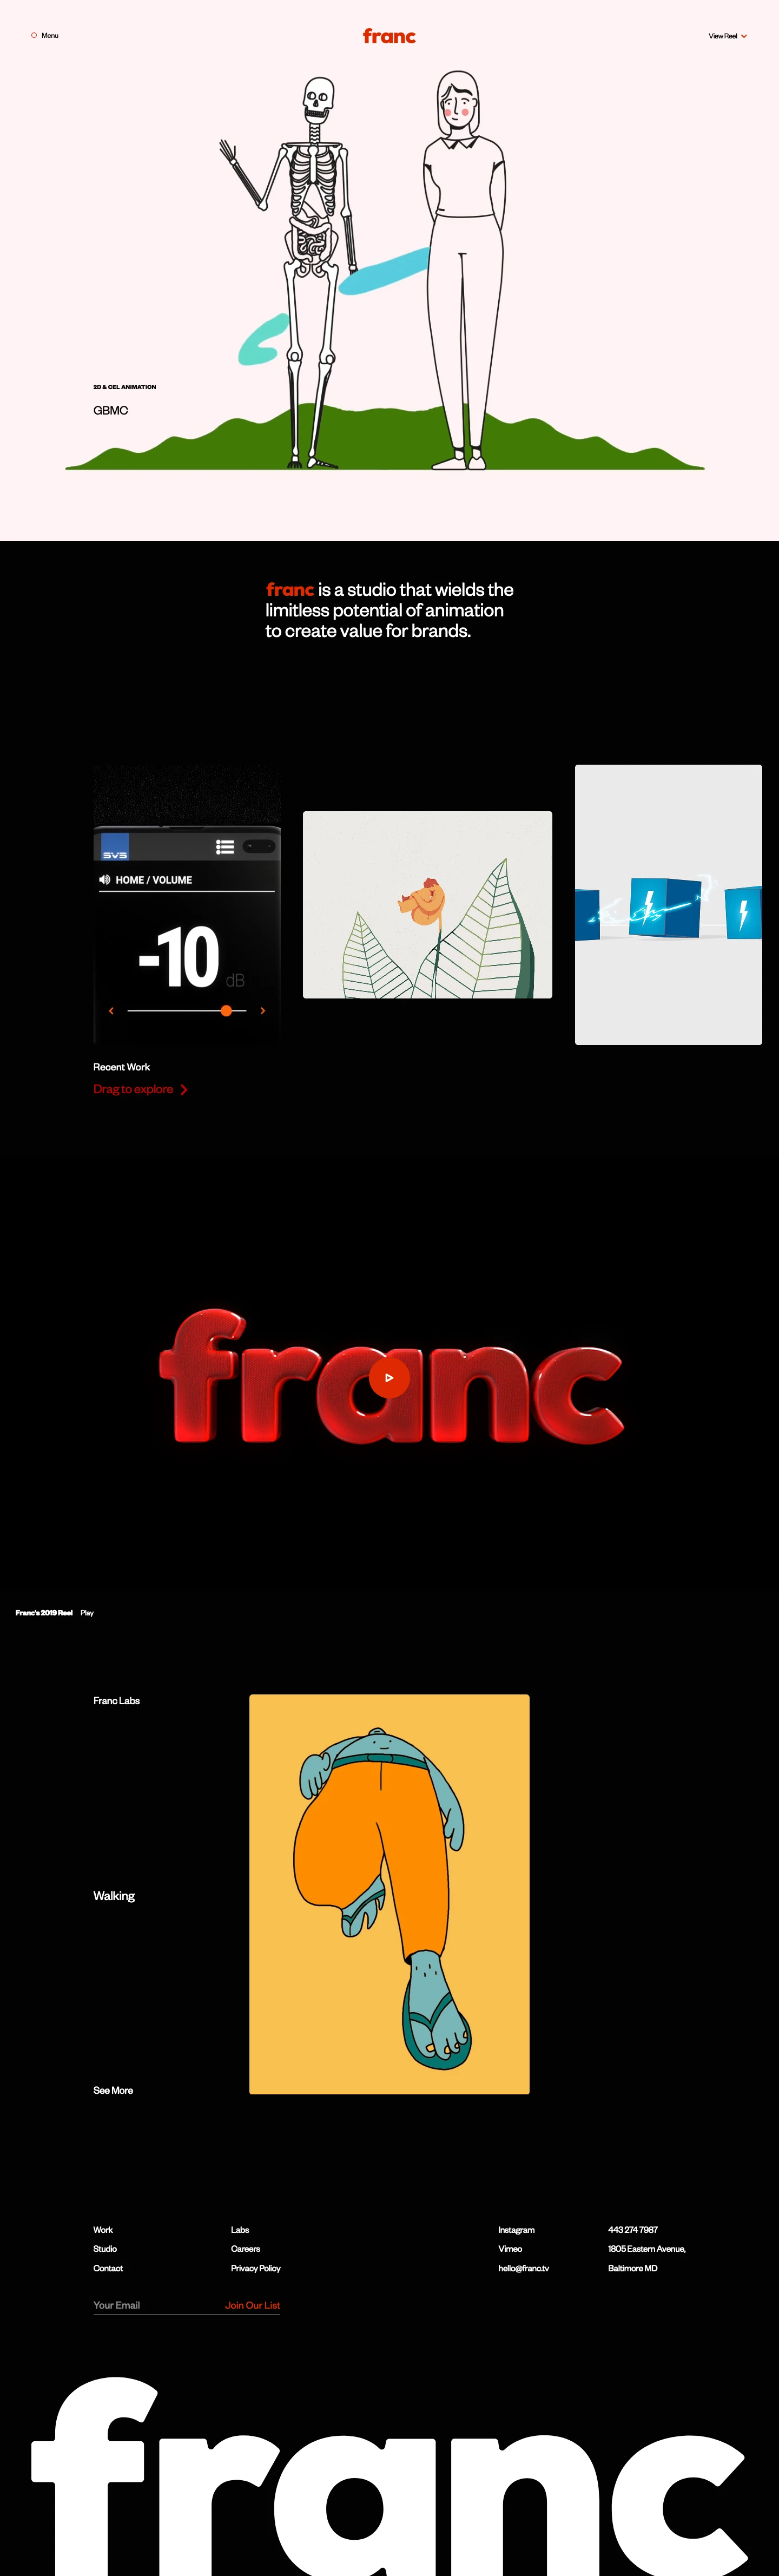 Franc Landing Page Example: Franc is a studio that wields the limitless potential of animation to create value for brands.